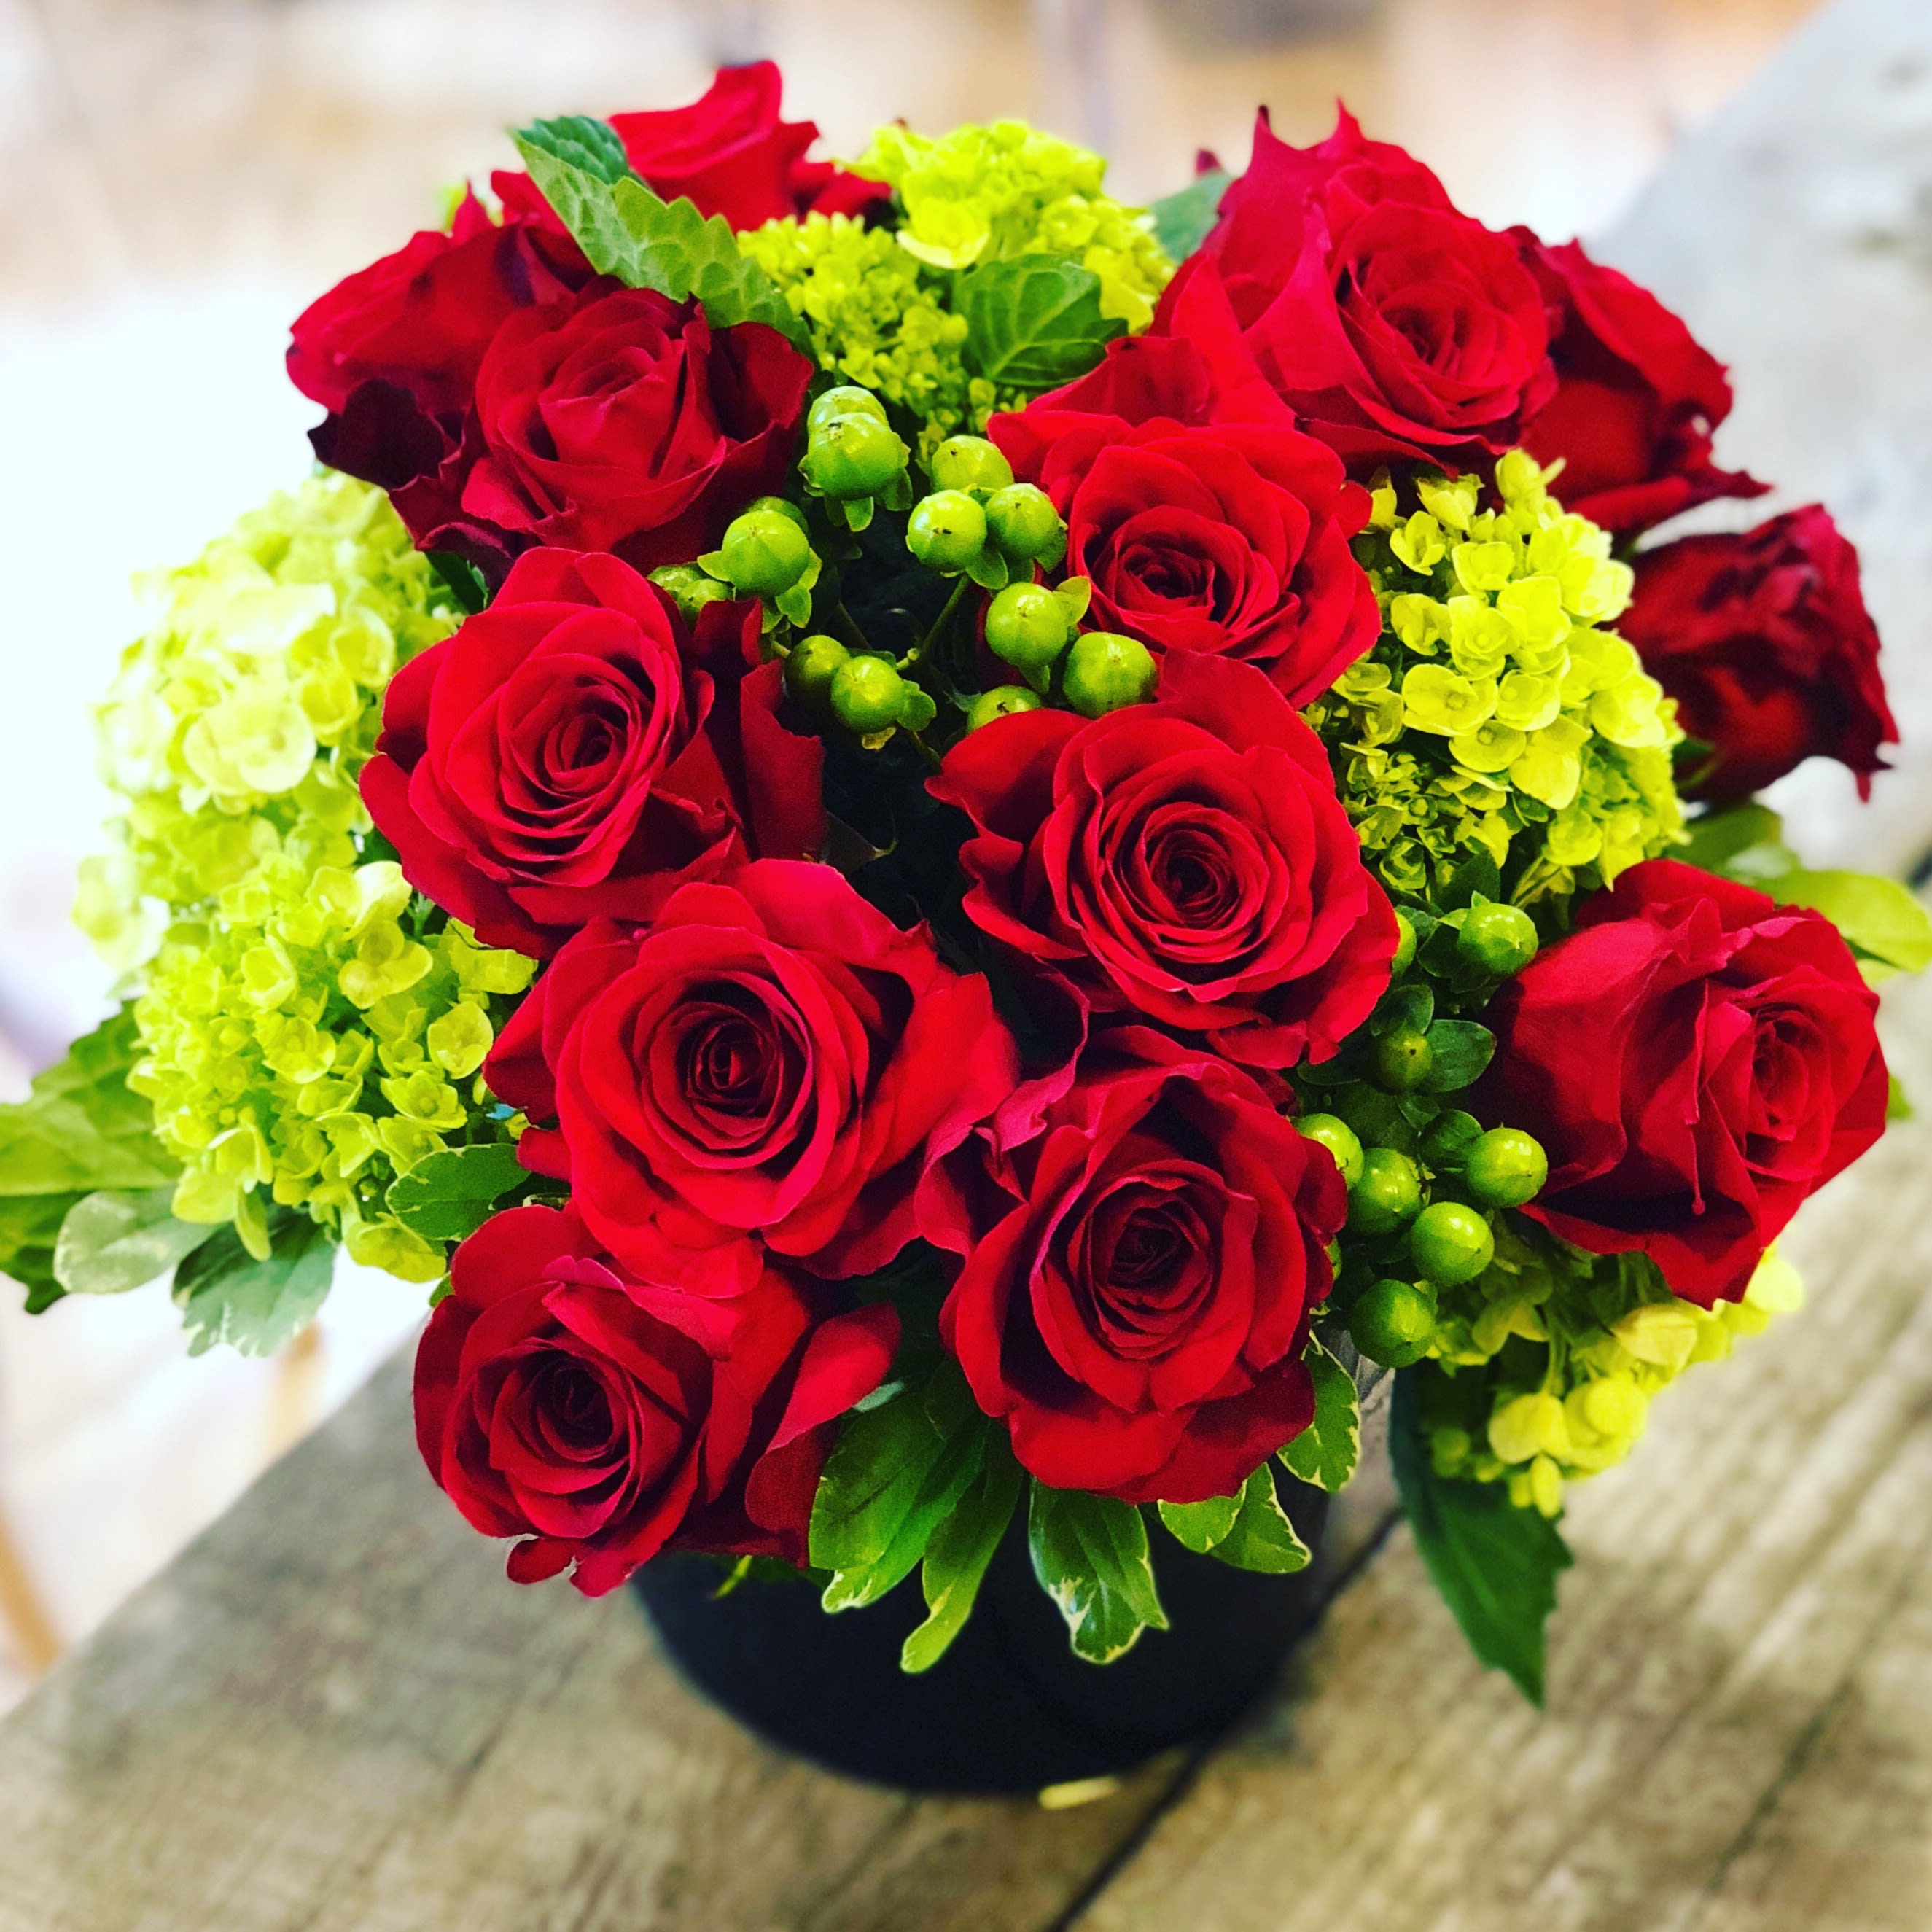 Standout Reds - This arrangement includes a plethora of beautiful freedom red roses sitting atop a bed of bright green hydrangea.  Designed in a contrasting, black vase to really make the blooms pop.